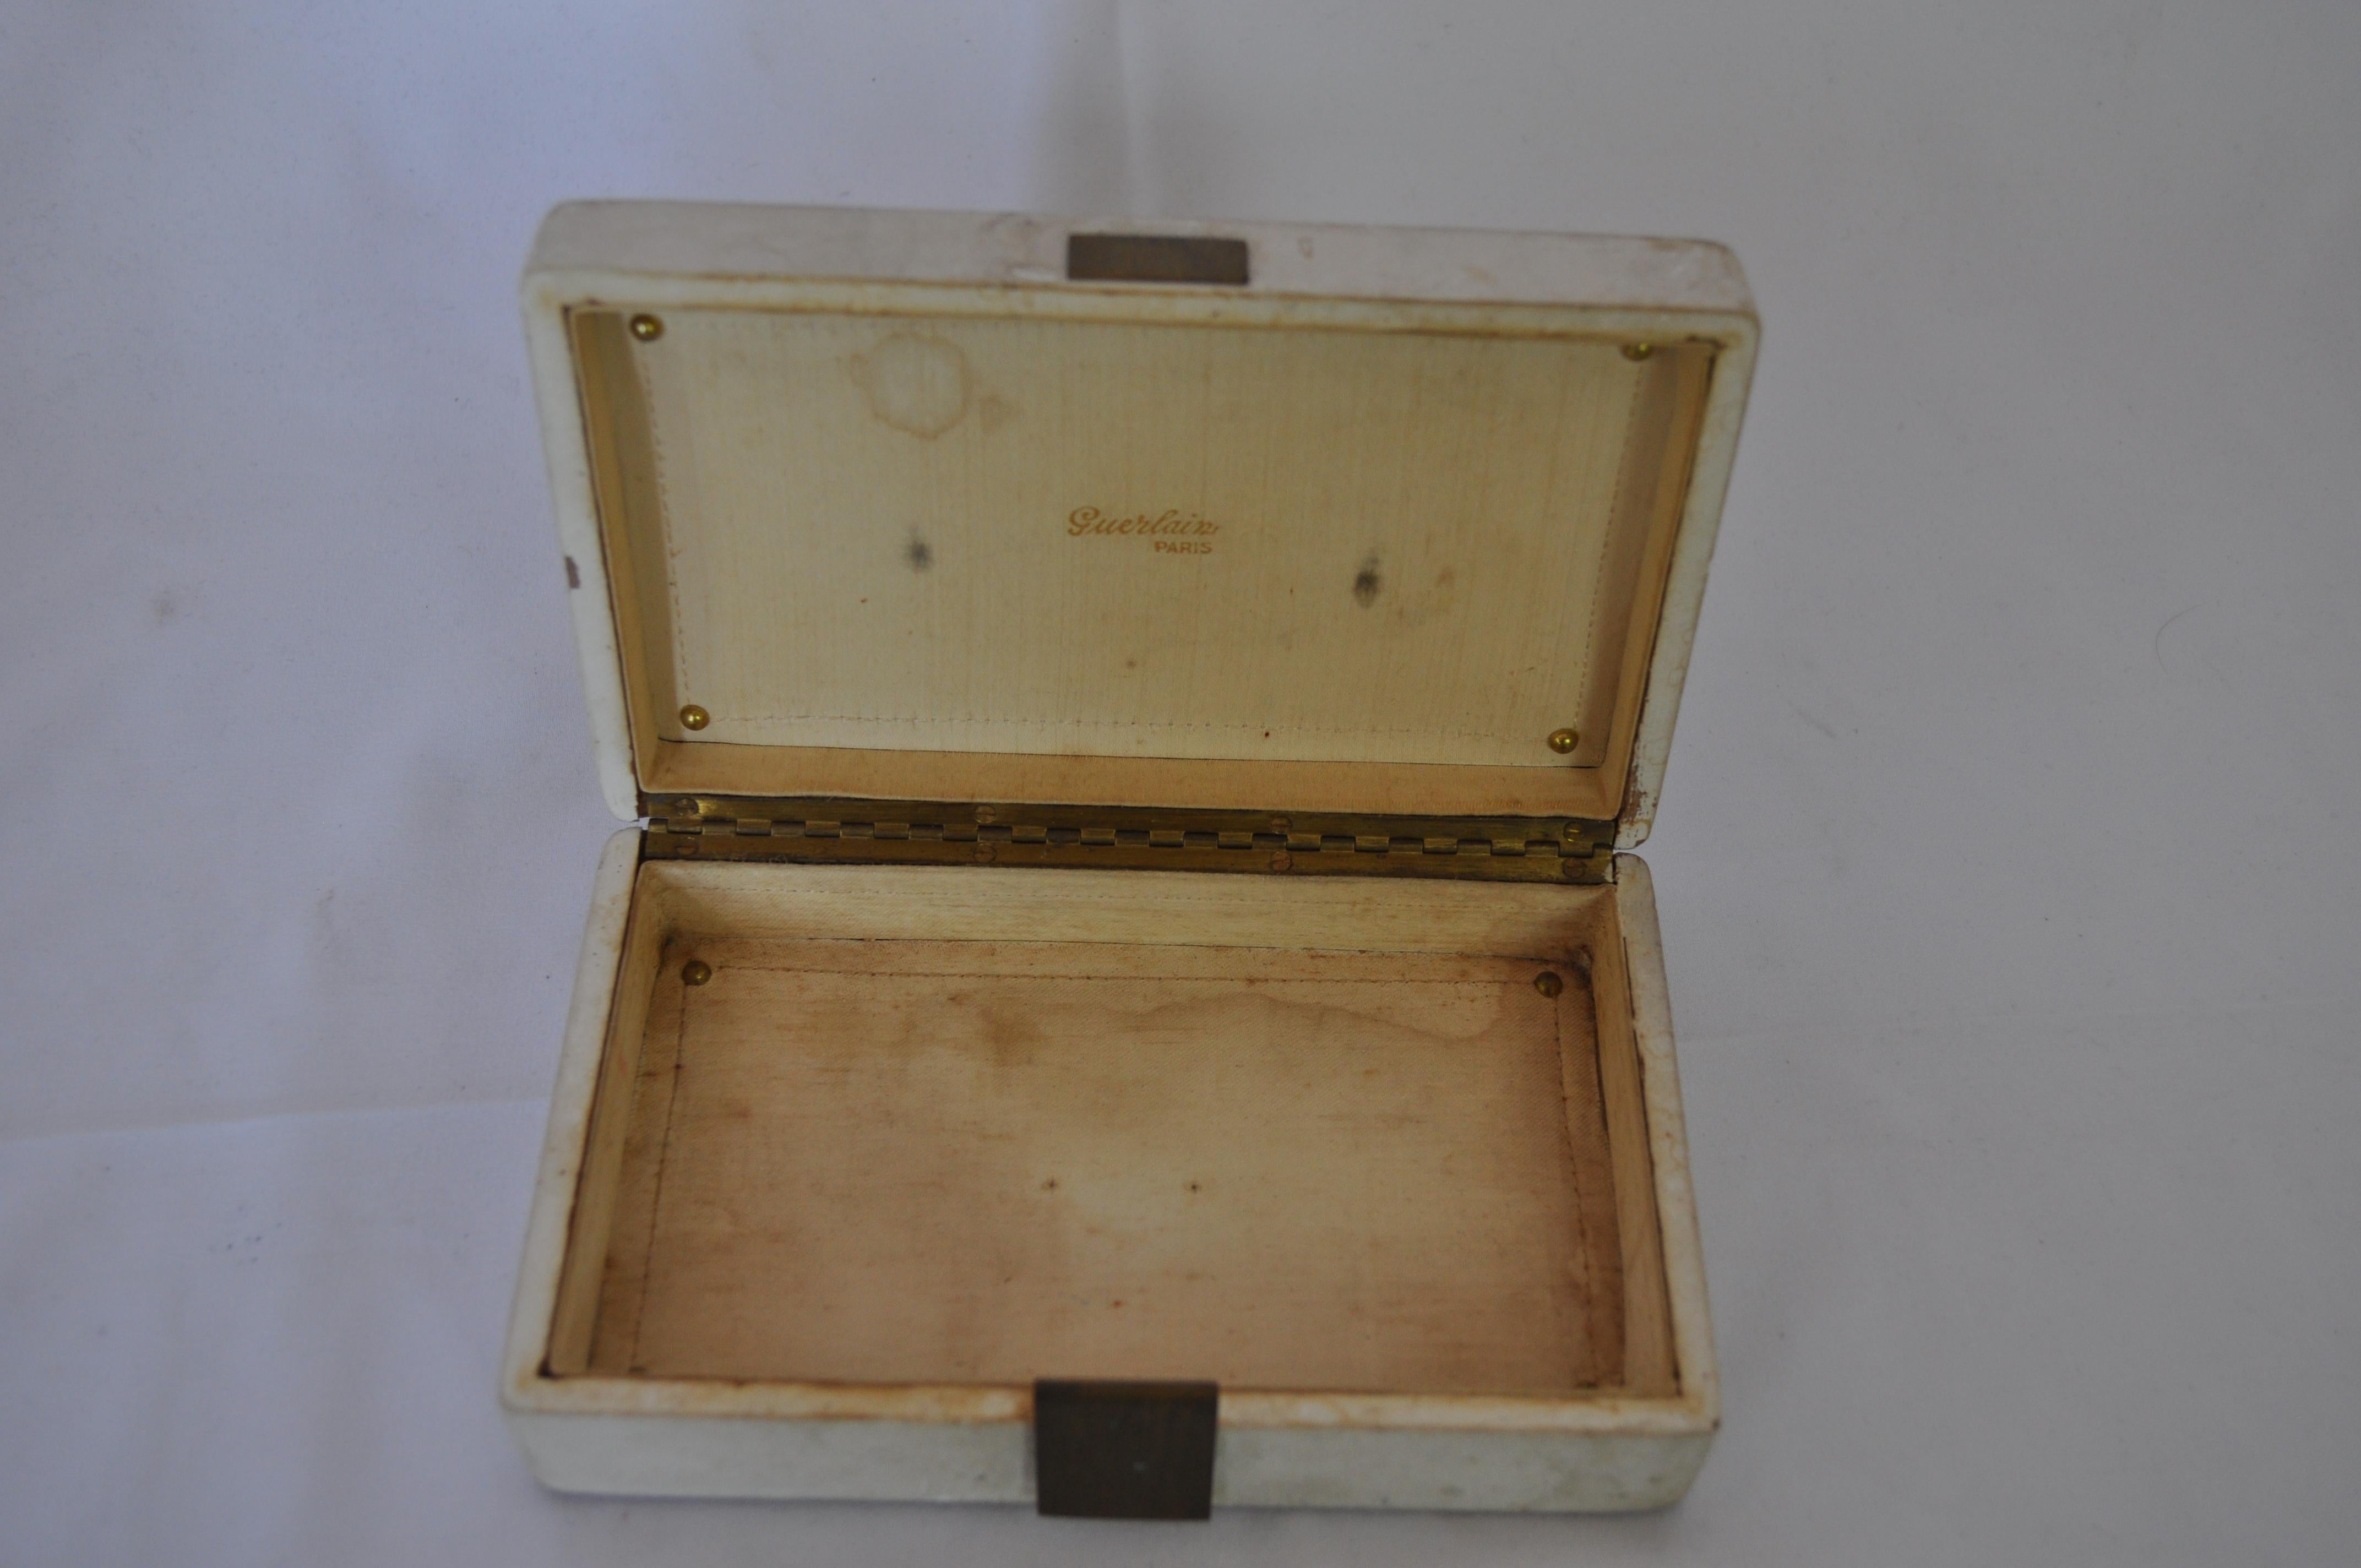 Rare and impressive perfume box designed by Jean Michel Franck for Gerlain in 1940. The box is made in poplar wood decorated with golden braces, surrounded by plaster and brass attach.